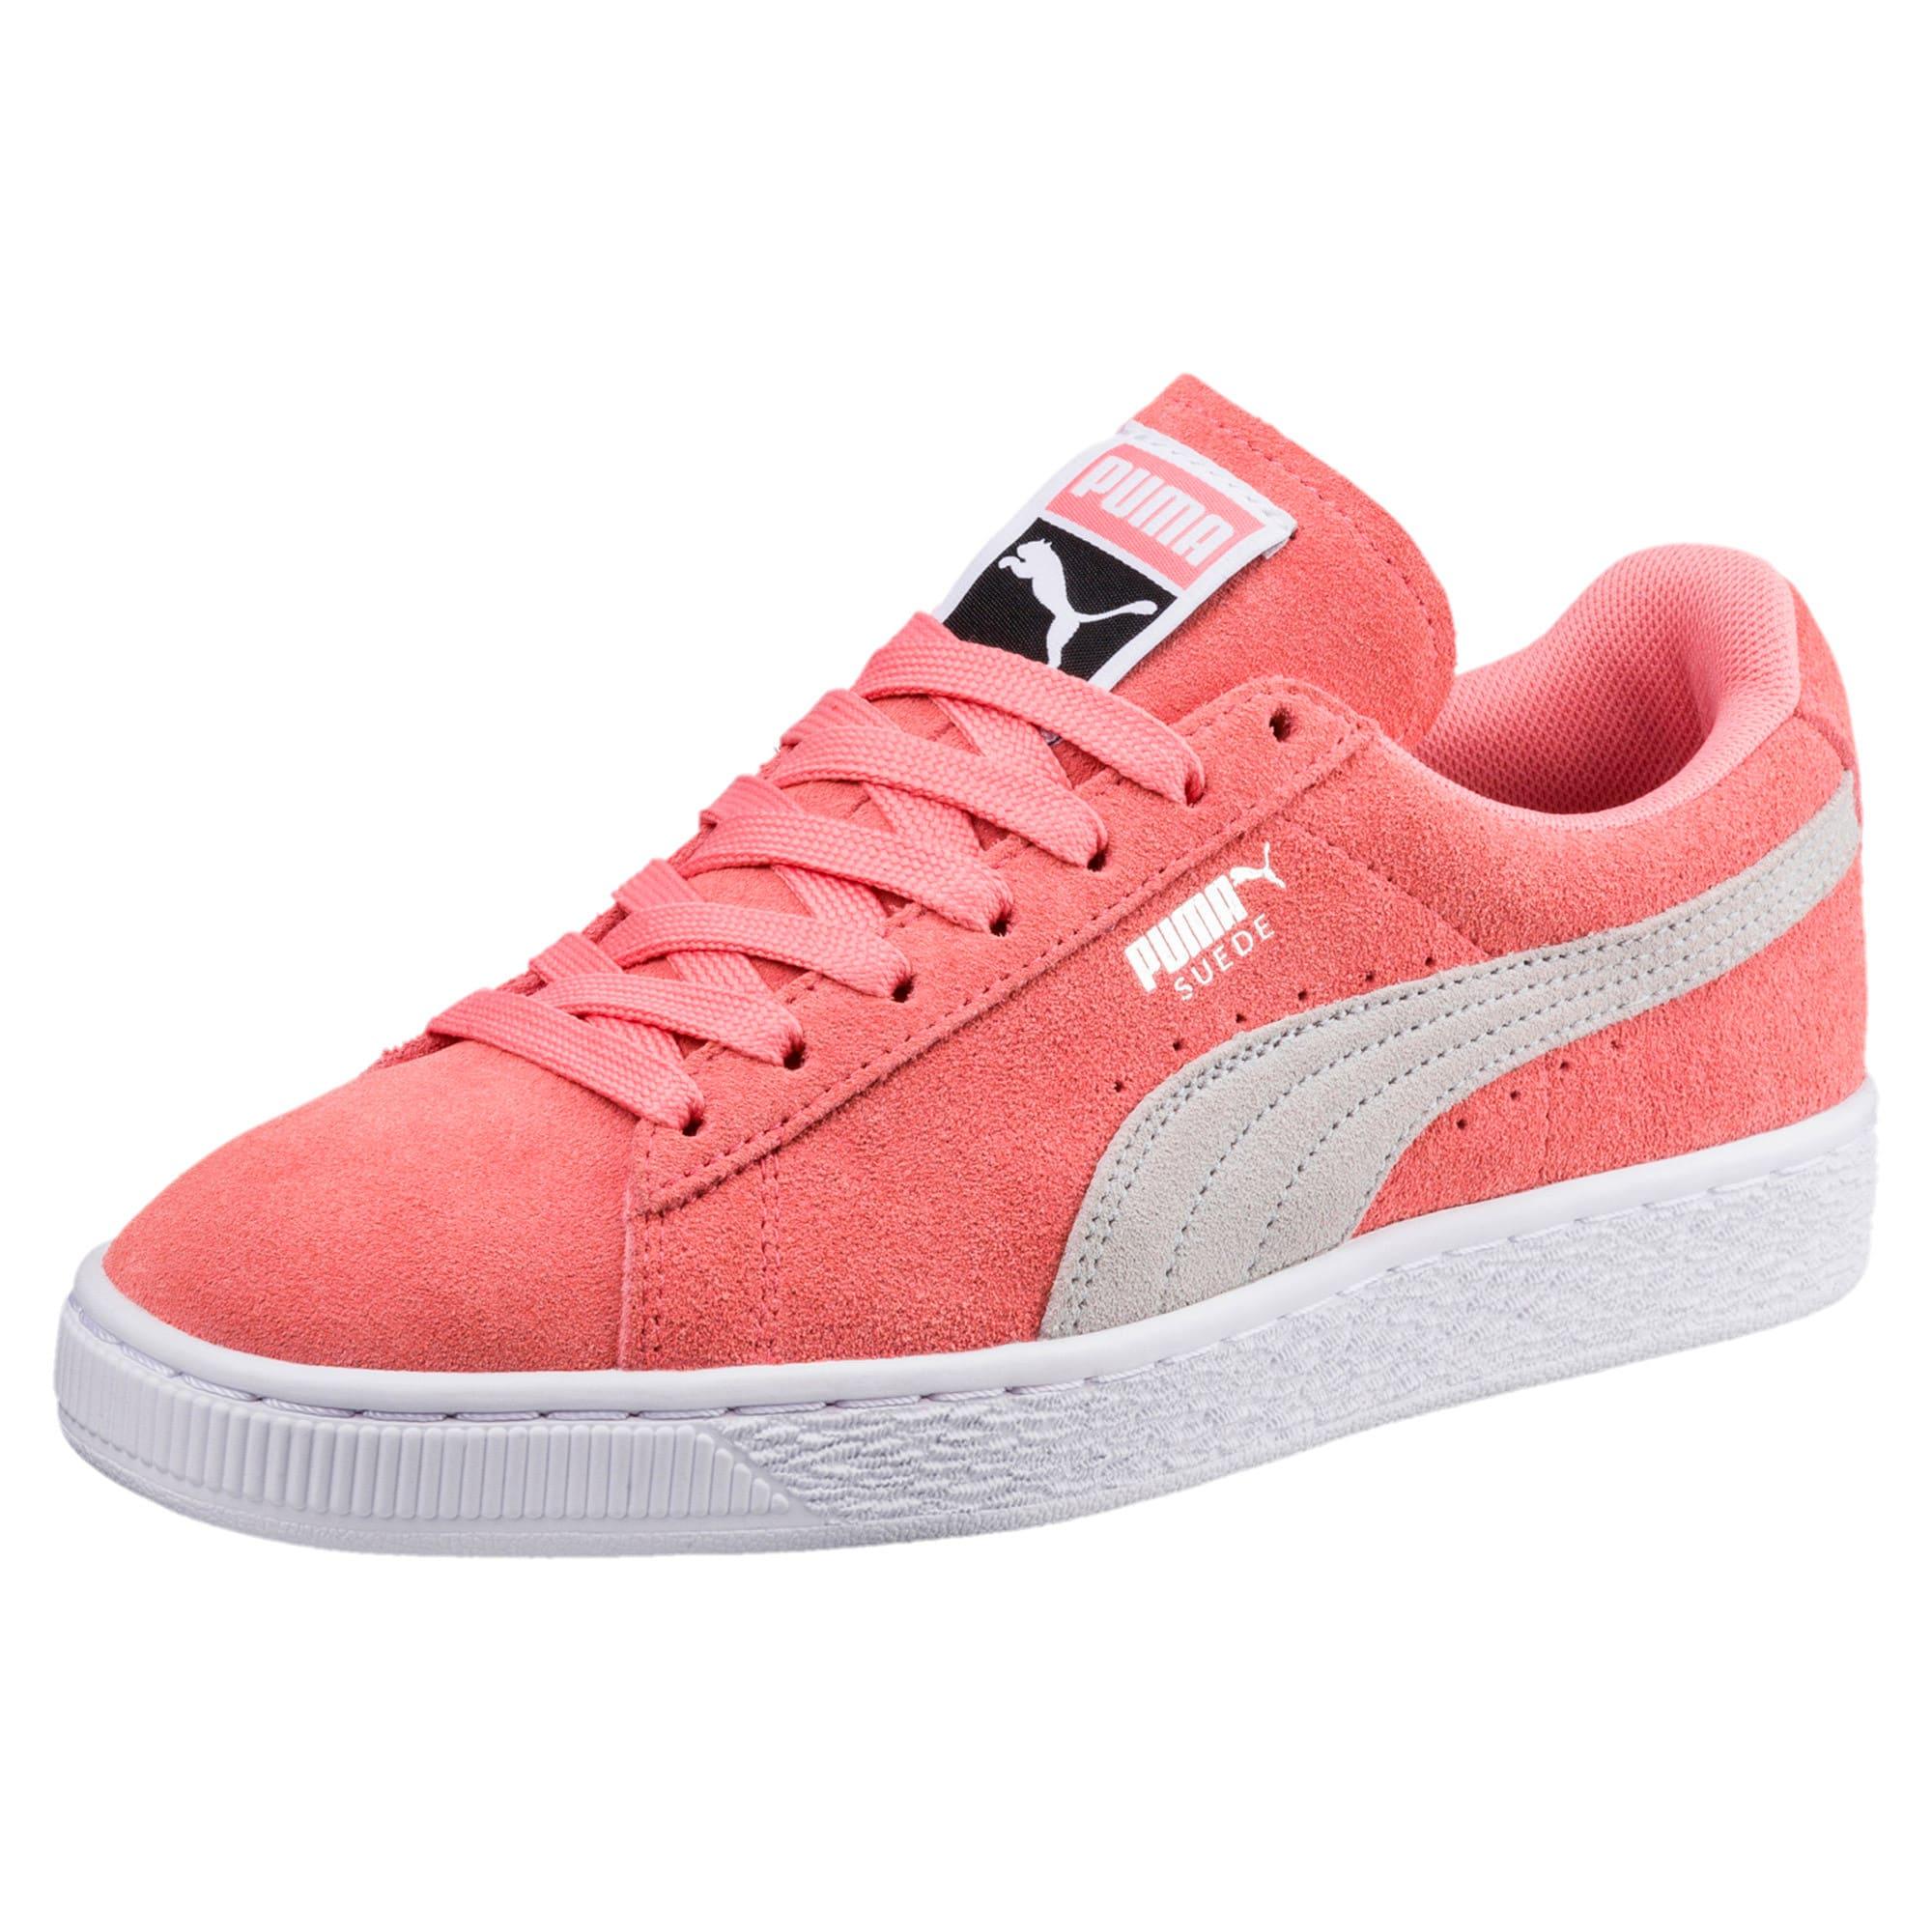 PUMA Suede Classic Women's Sneakers in Pink - Lyst